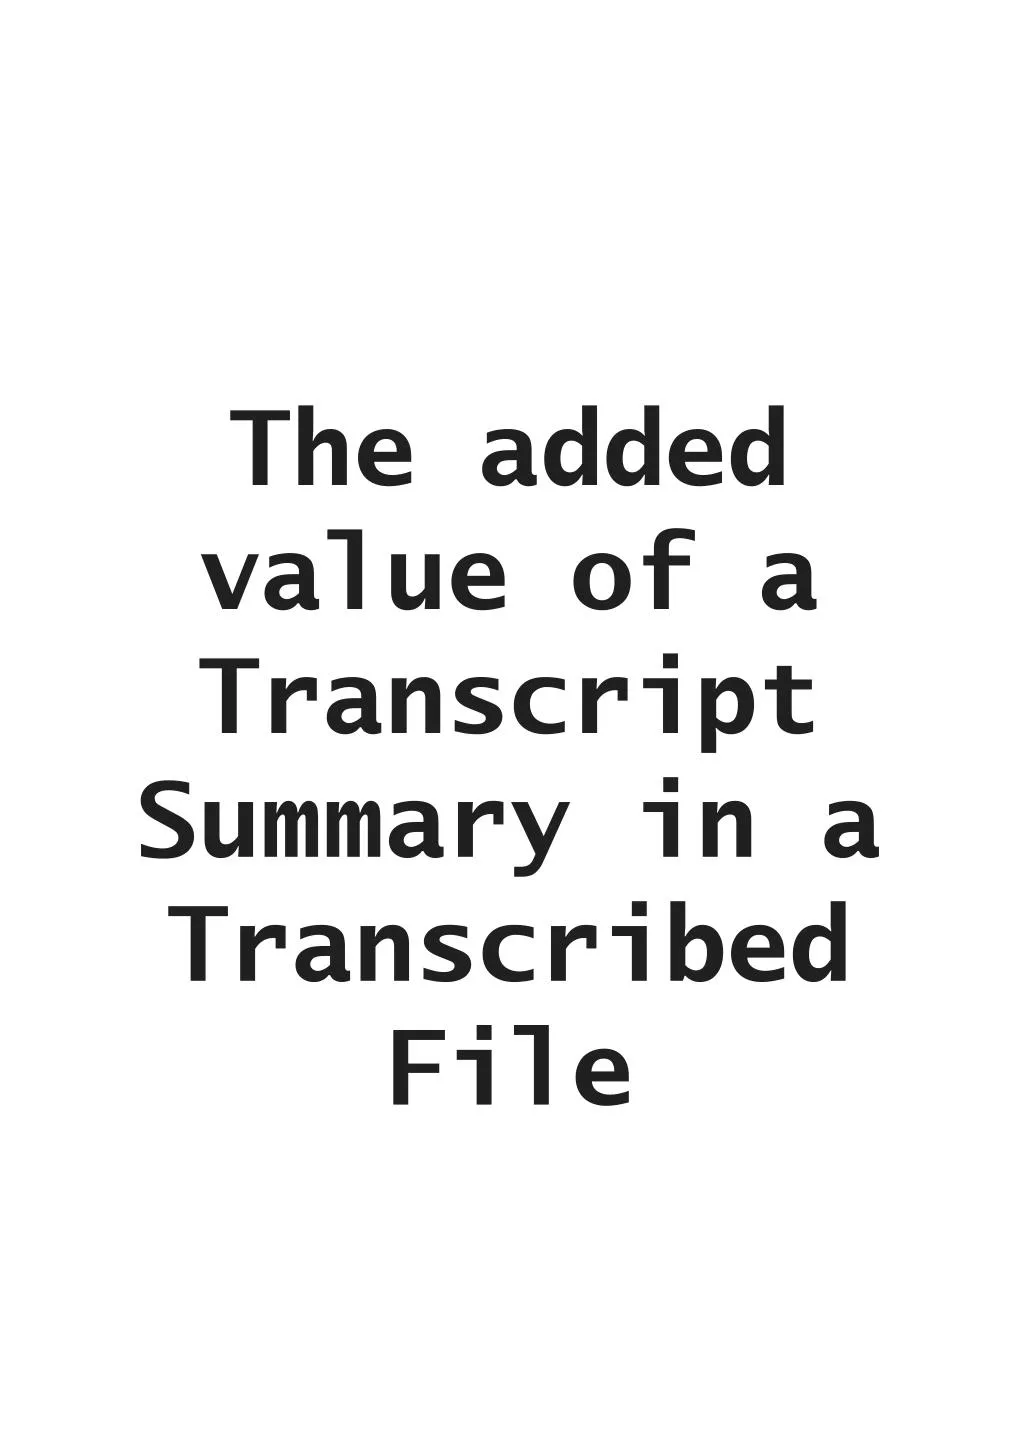 the added value of a transcript summary in a transcribed file